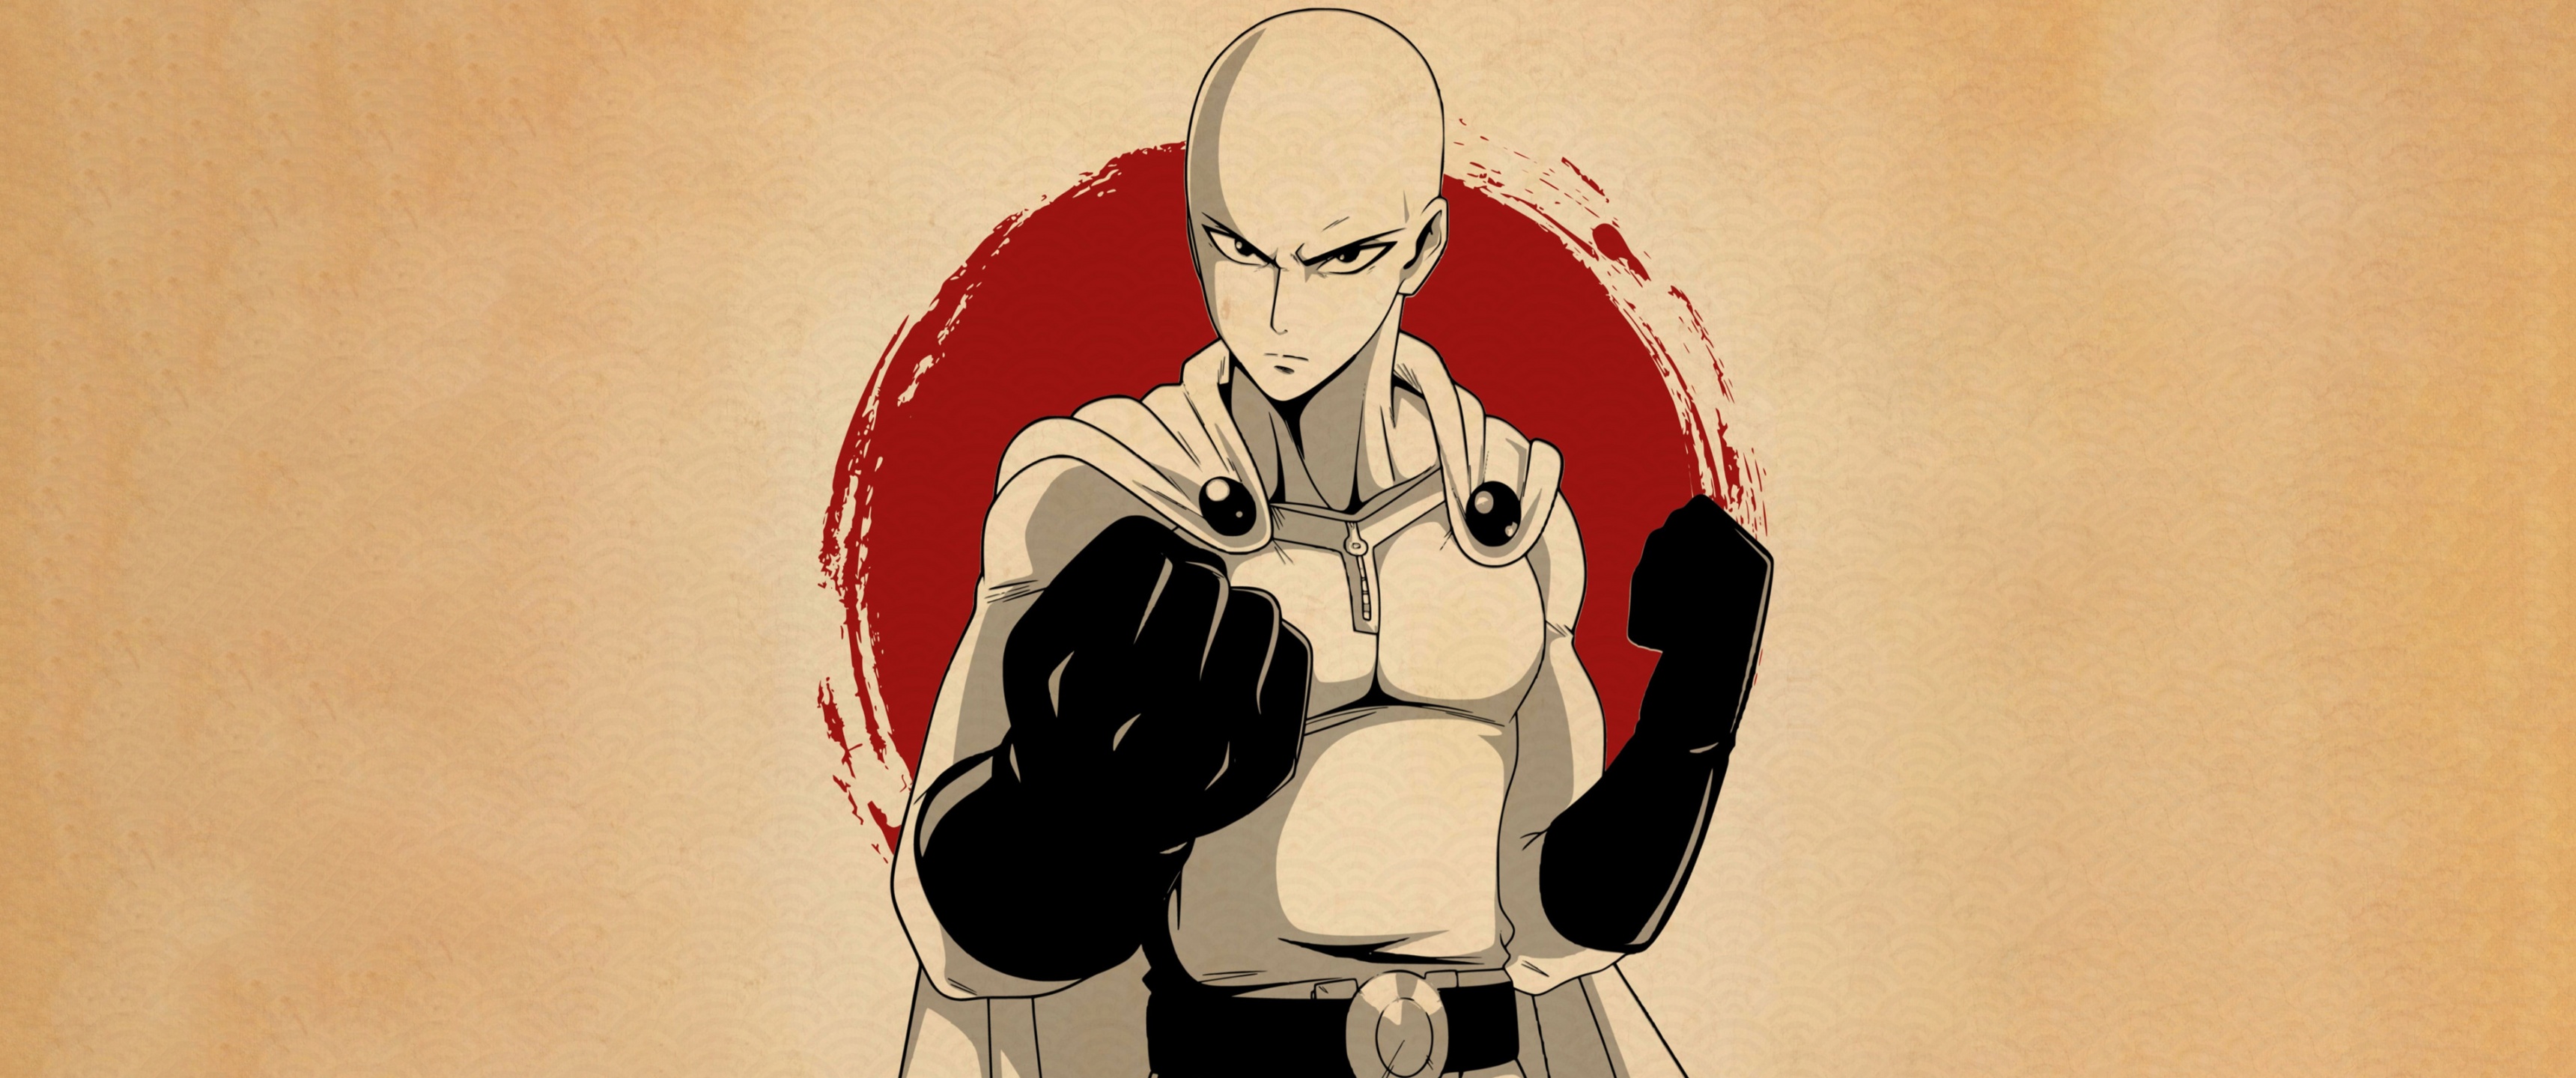 650+ Anime One-Punch Man HD Wallpapers and Backgrounds